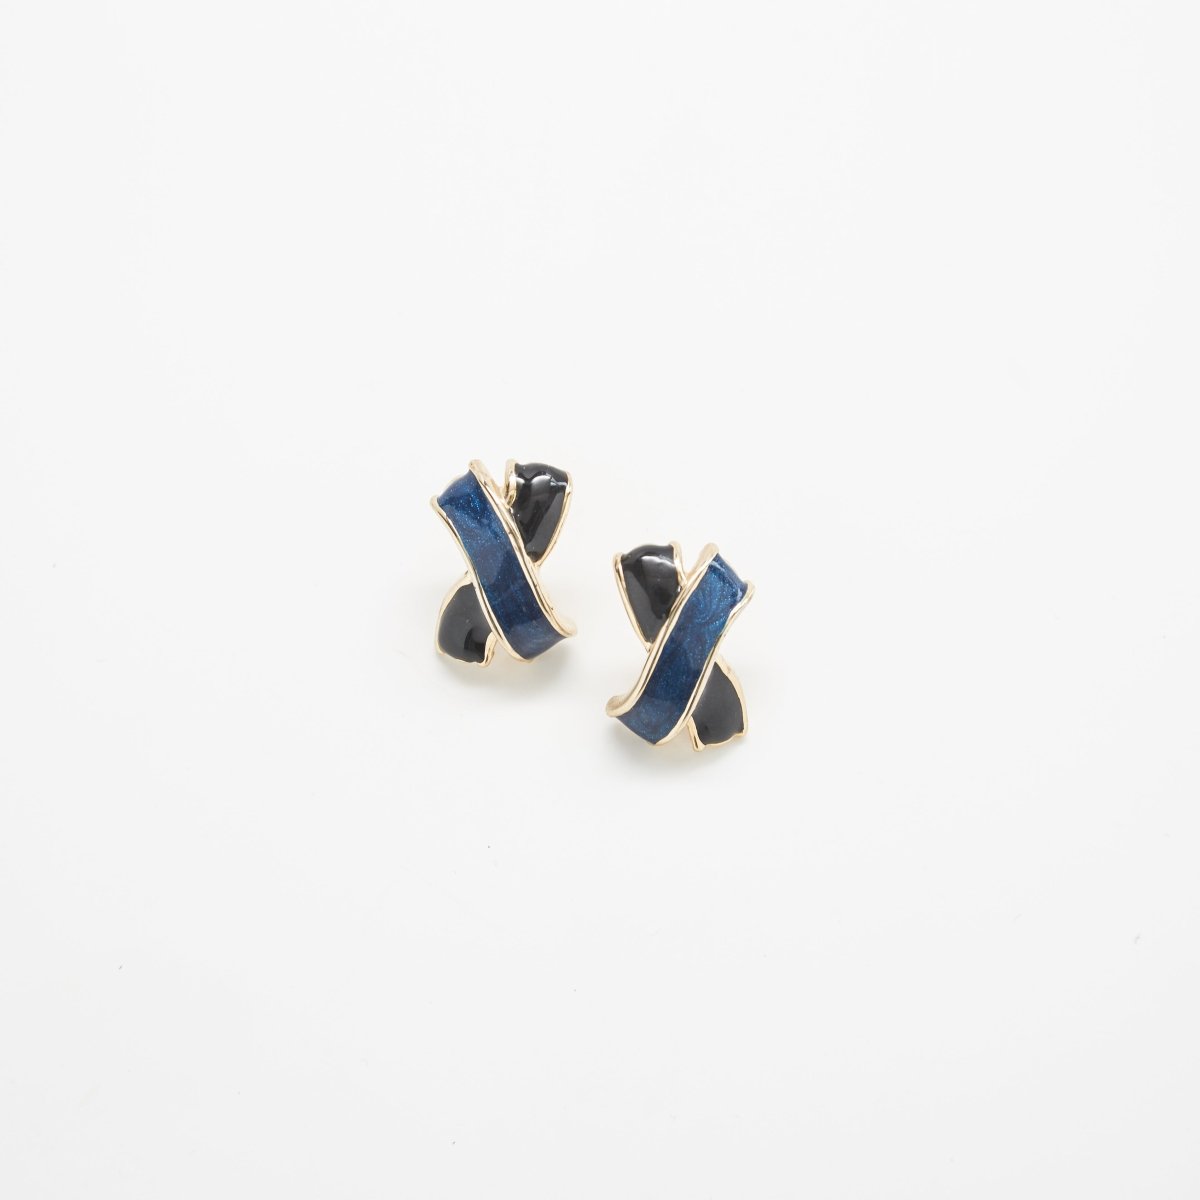 Vintage Black and Blue "X" Earrings - Admiral Row